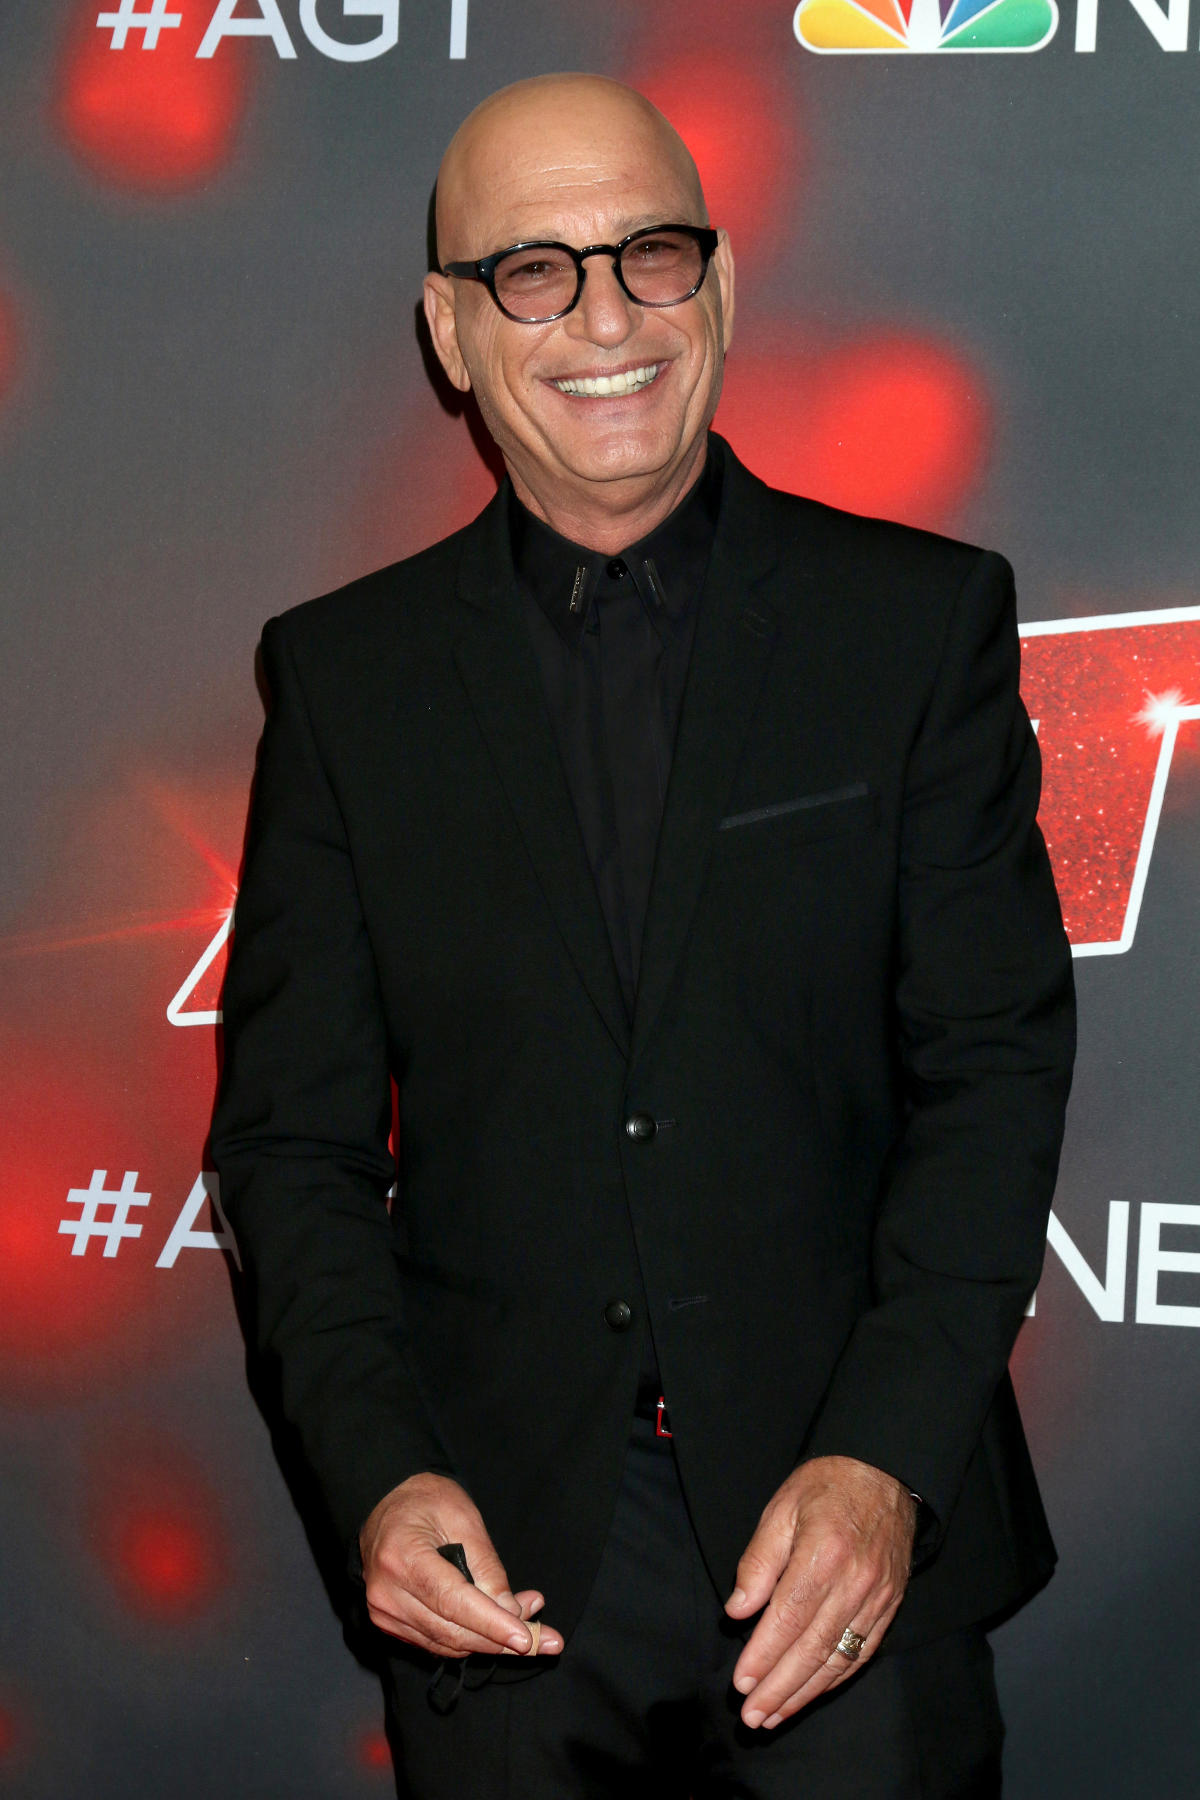 Howie Mandel Is an All Star Find Out the ‘America’s Got Talent’ Judge